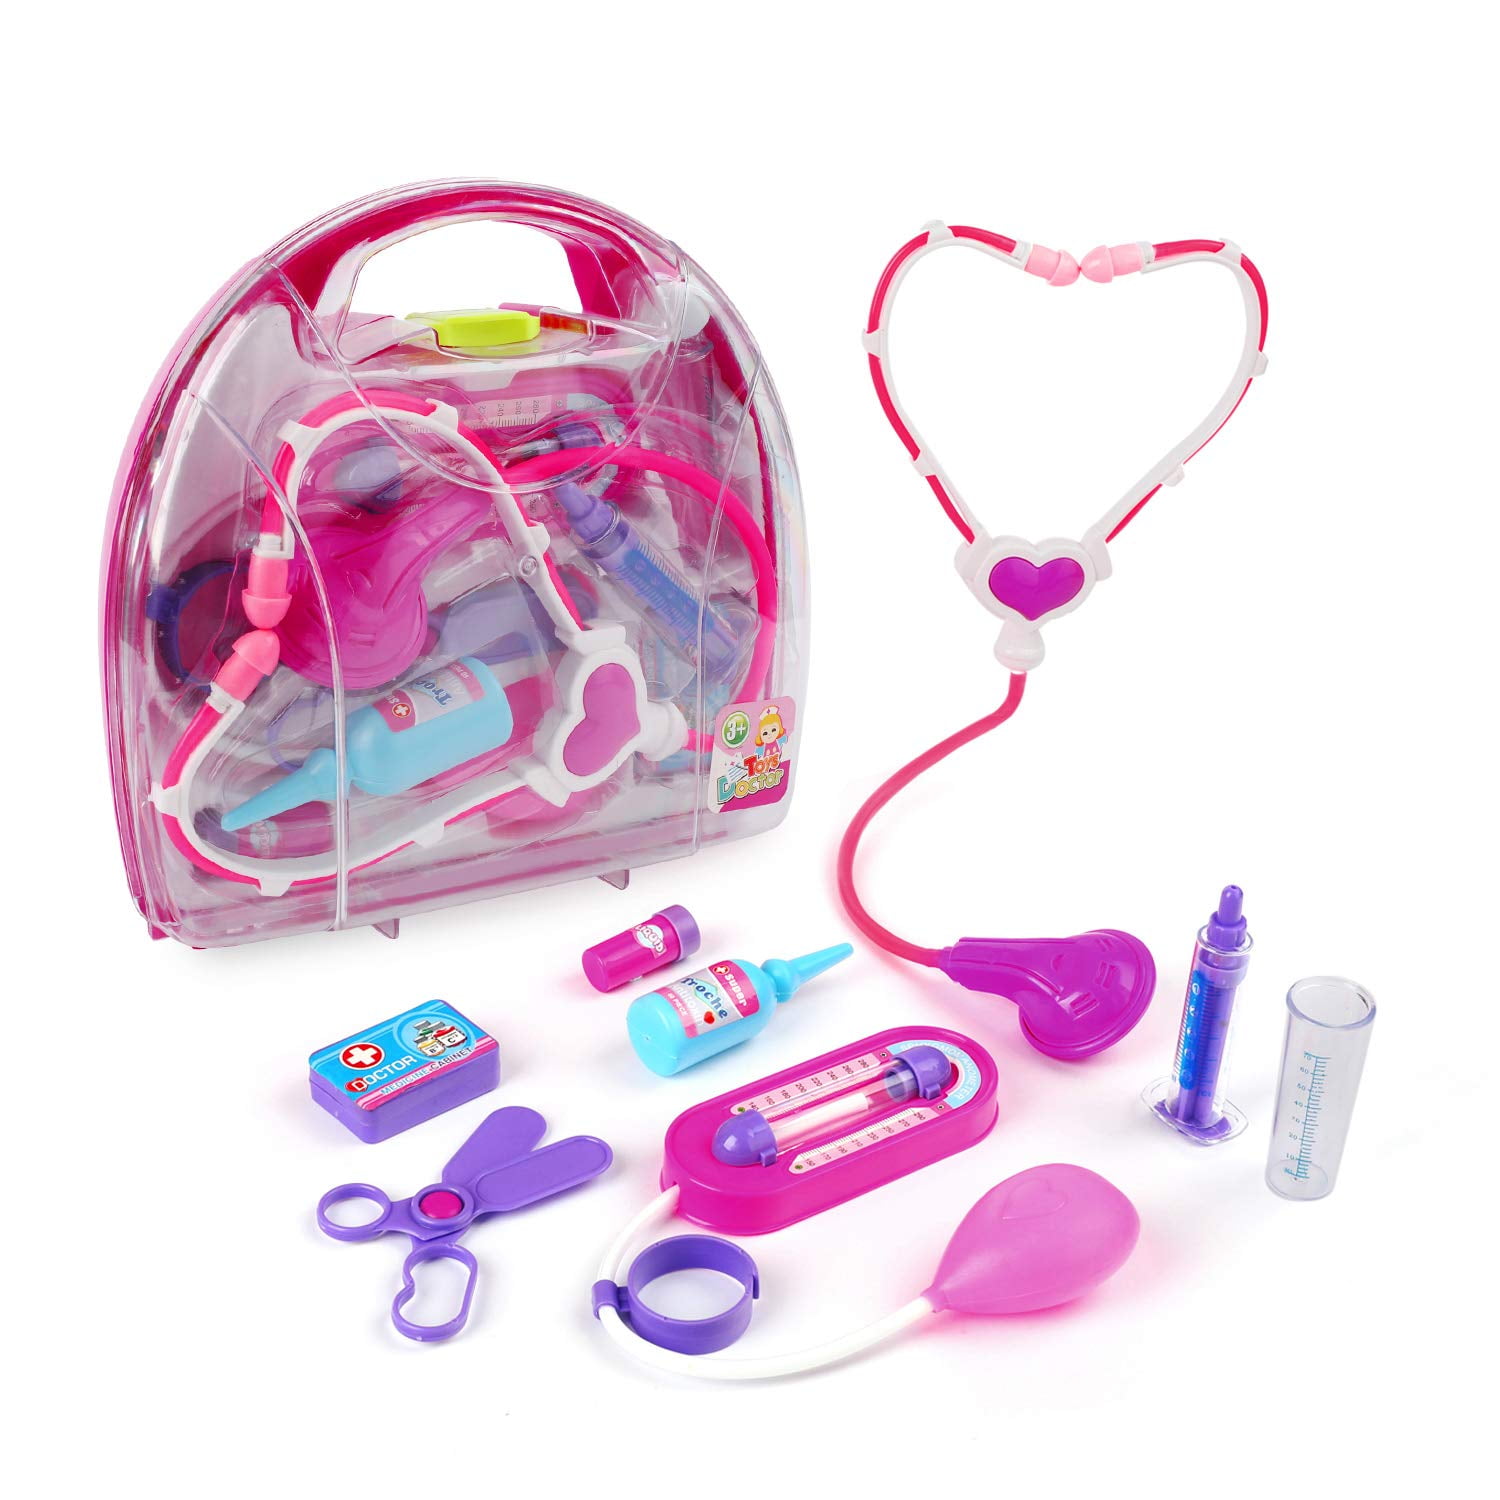 Kids Pretending Doctor's Medical Playing Set Case Education Kit Role Play Toy 